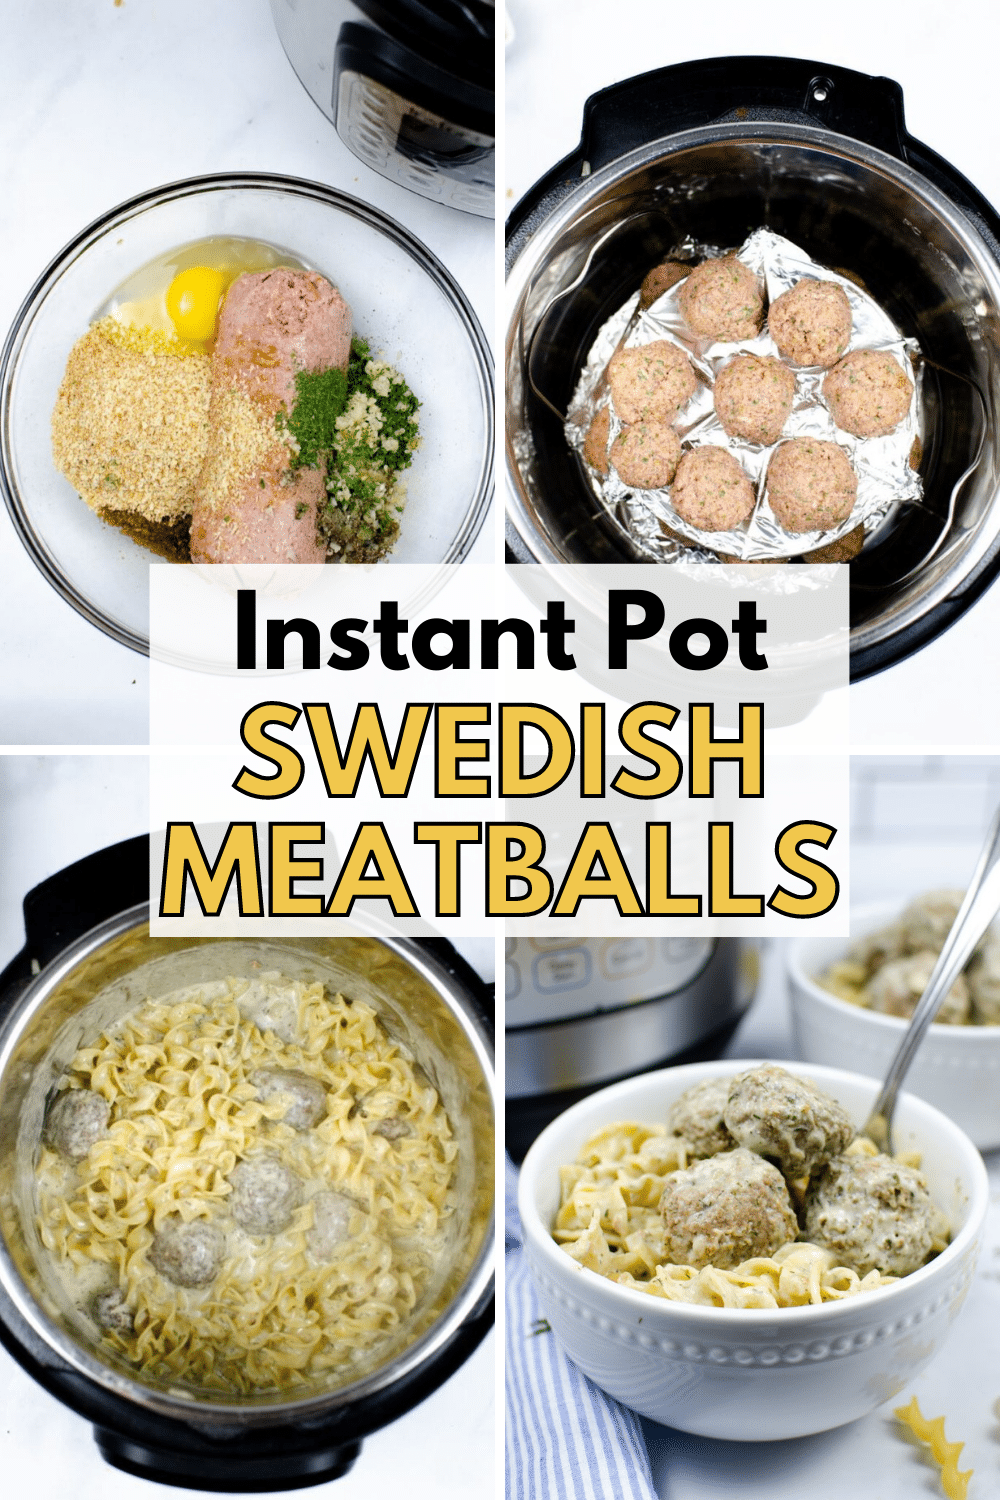 These tender turkey meat instant pot Swedish meatballs are delicious and creamy. Make these flavorful meatballs at home for a classic weeknight dinner! #instantpot #swedishmeatballs #turkey #meatballs #dinner via @wondermomwannab